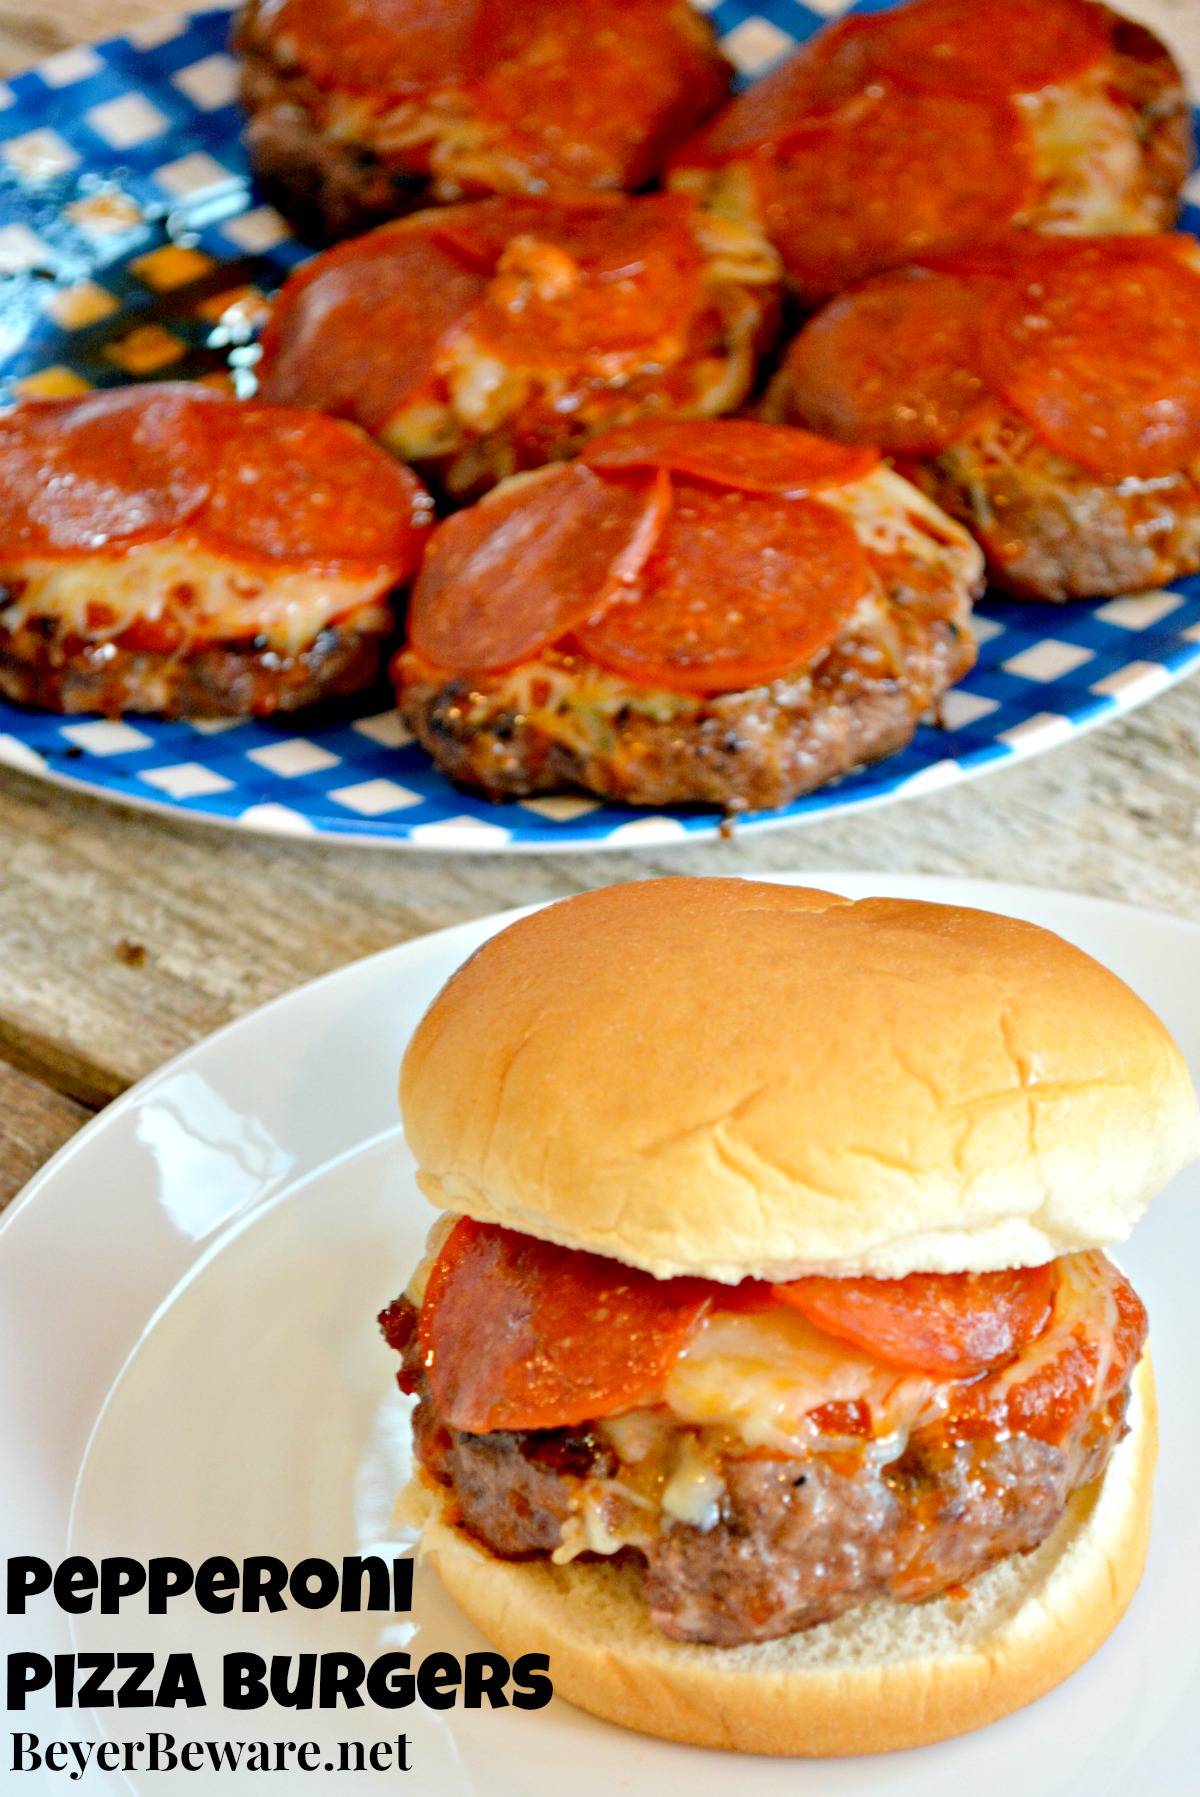 If you have a hard time choosing between burgers or pizza, these pepperoni pizza burgers will be your new favorite burger combining two All-American favorites.